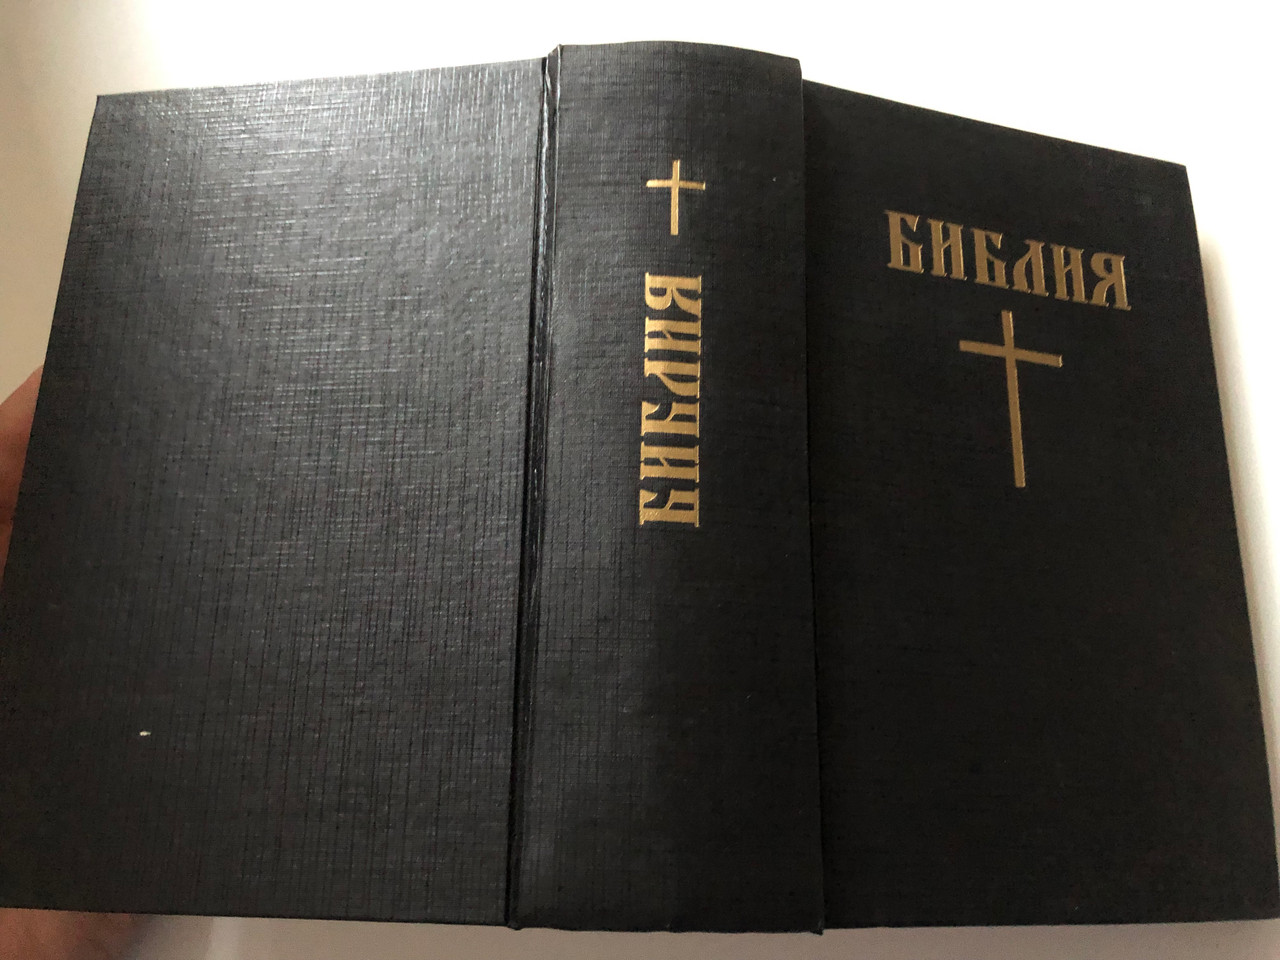 https://cdn10.bigcommerce.com/s-62bdpkt7pb/products/0/images/261178/Russian_Holy_Bible_with_parallel_passages_14__94710.1671299740.1280.1280.JPG?c=2